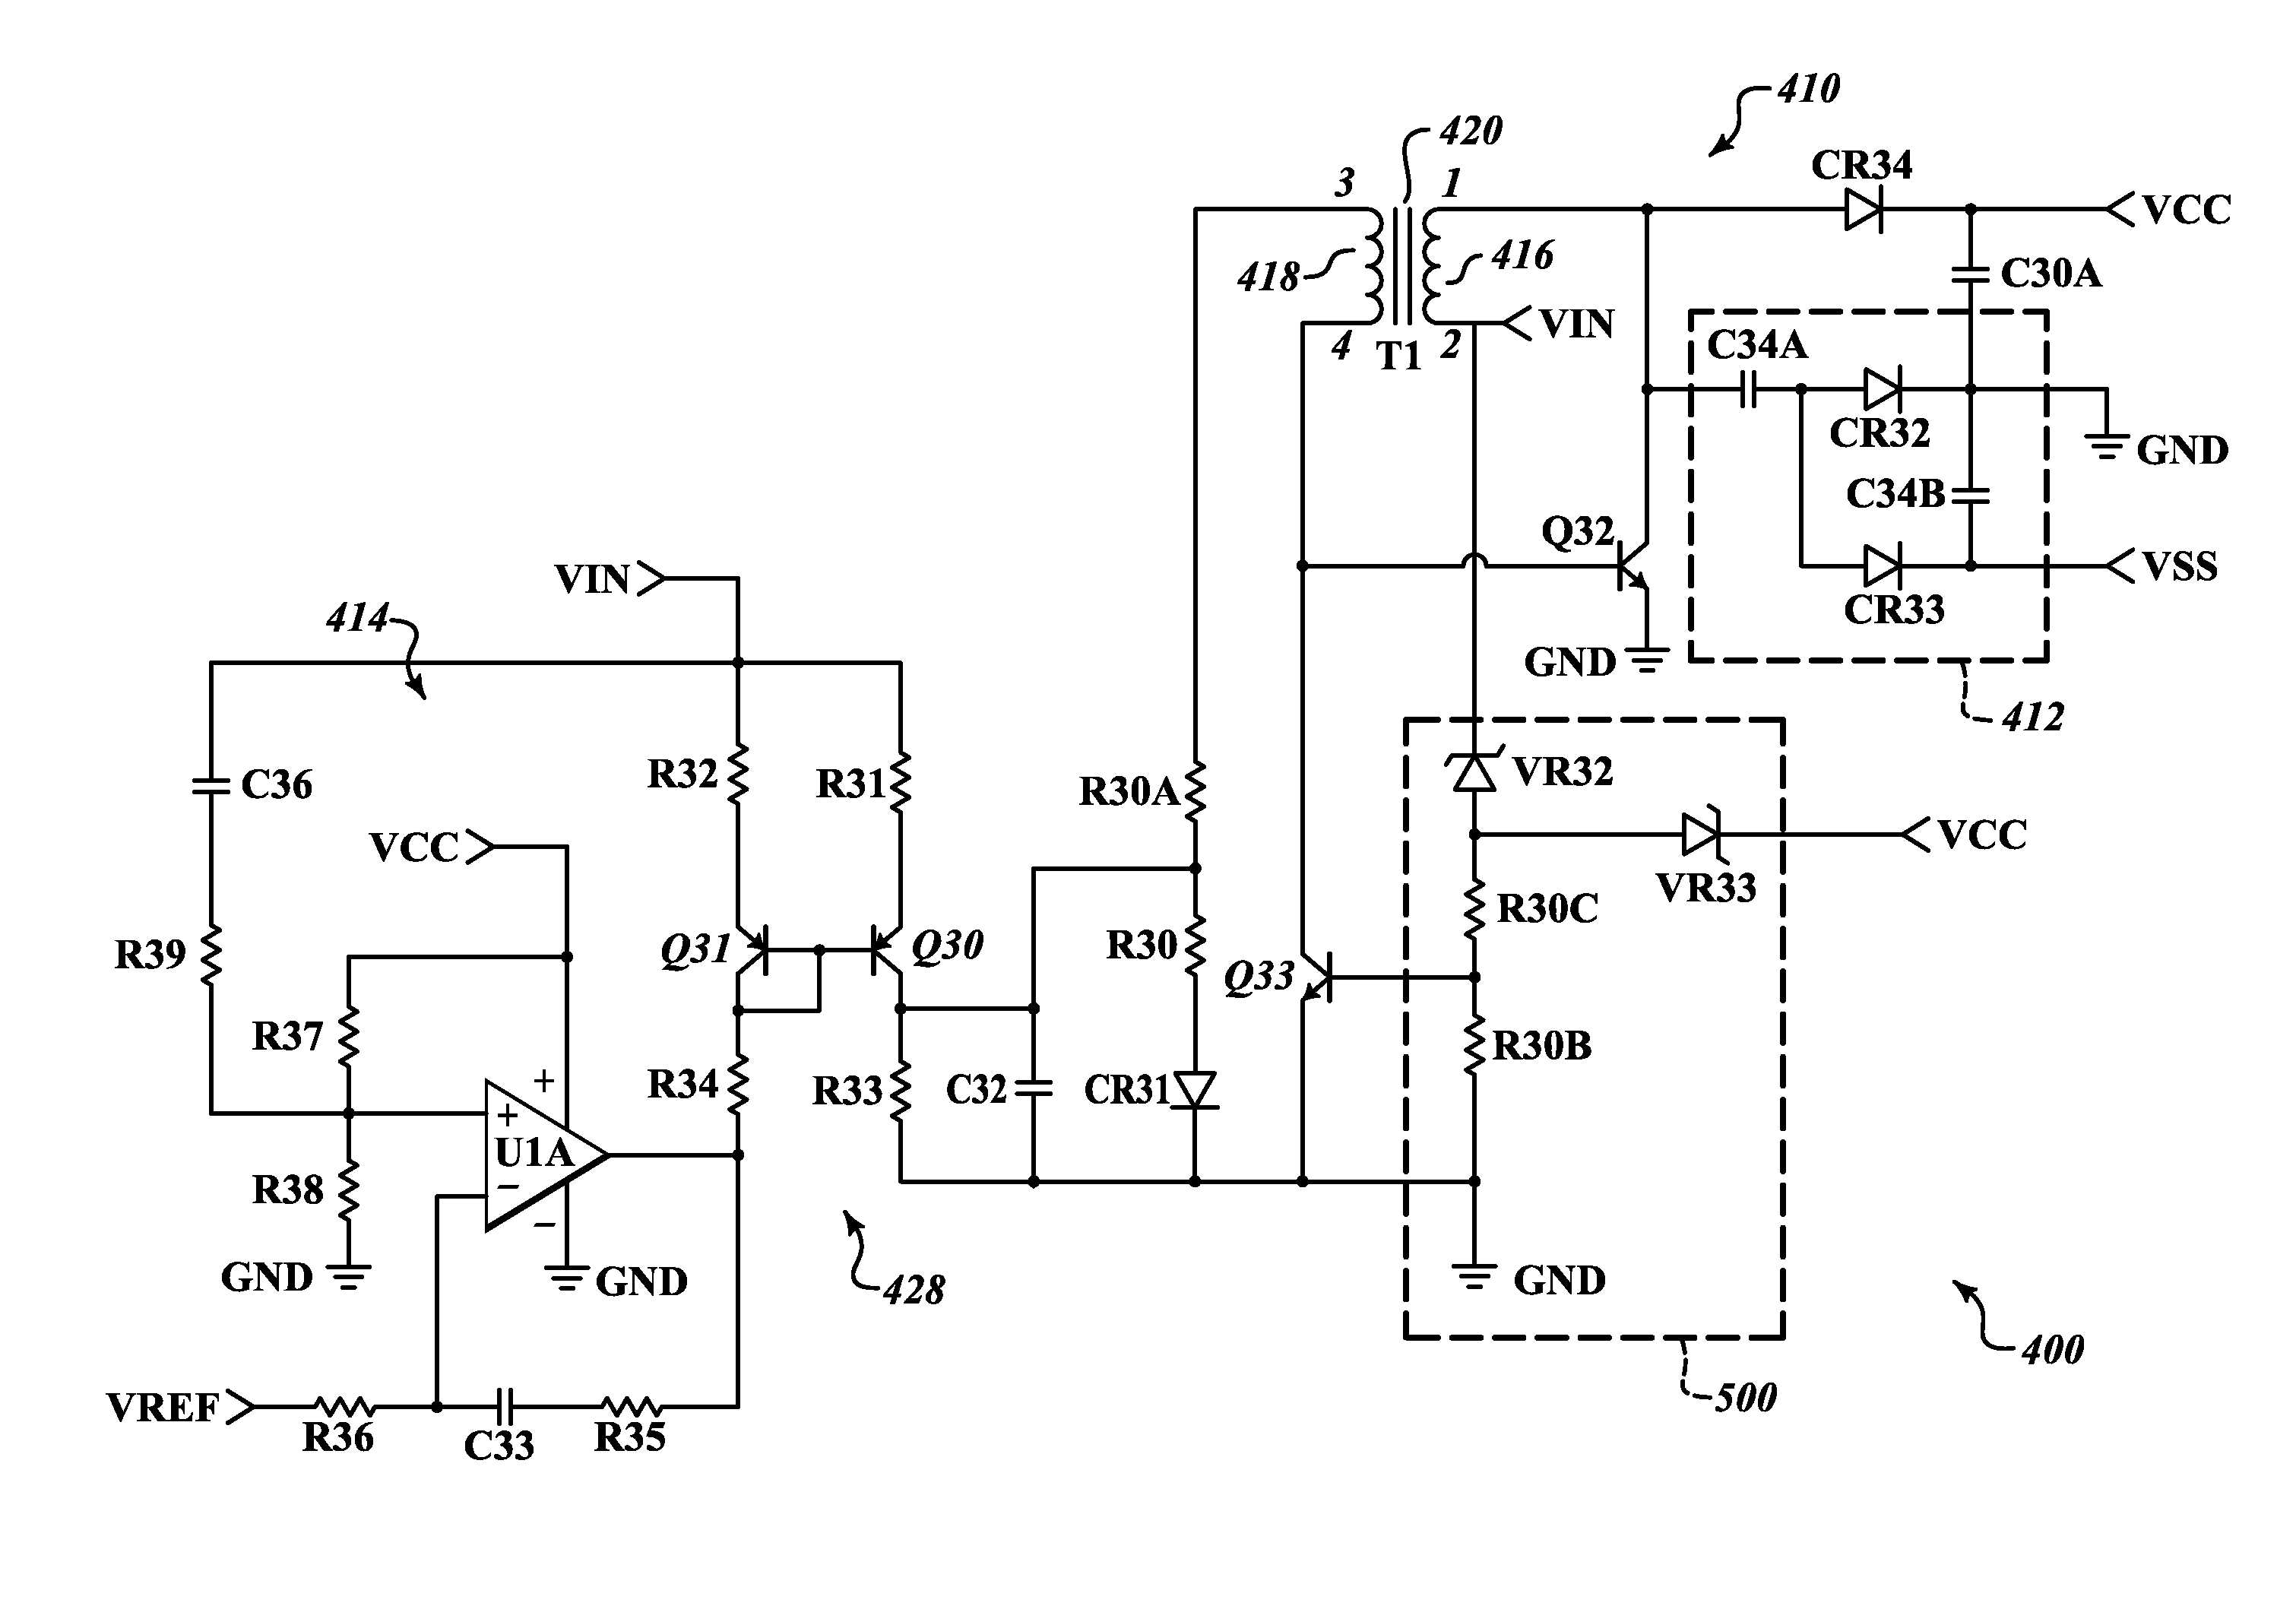 Self synchronizing power converter apparatus and method suitable for auxiliary bias for dynamic load applications